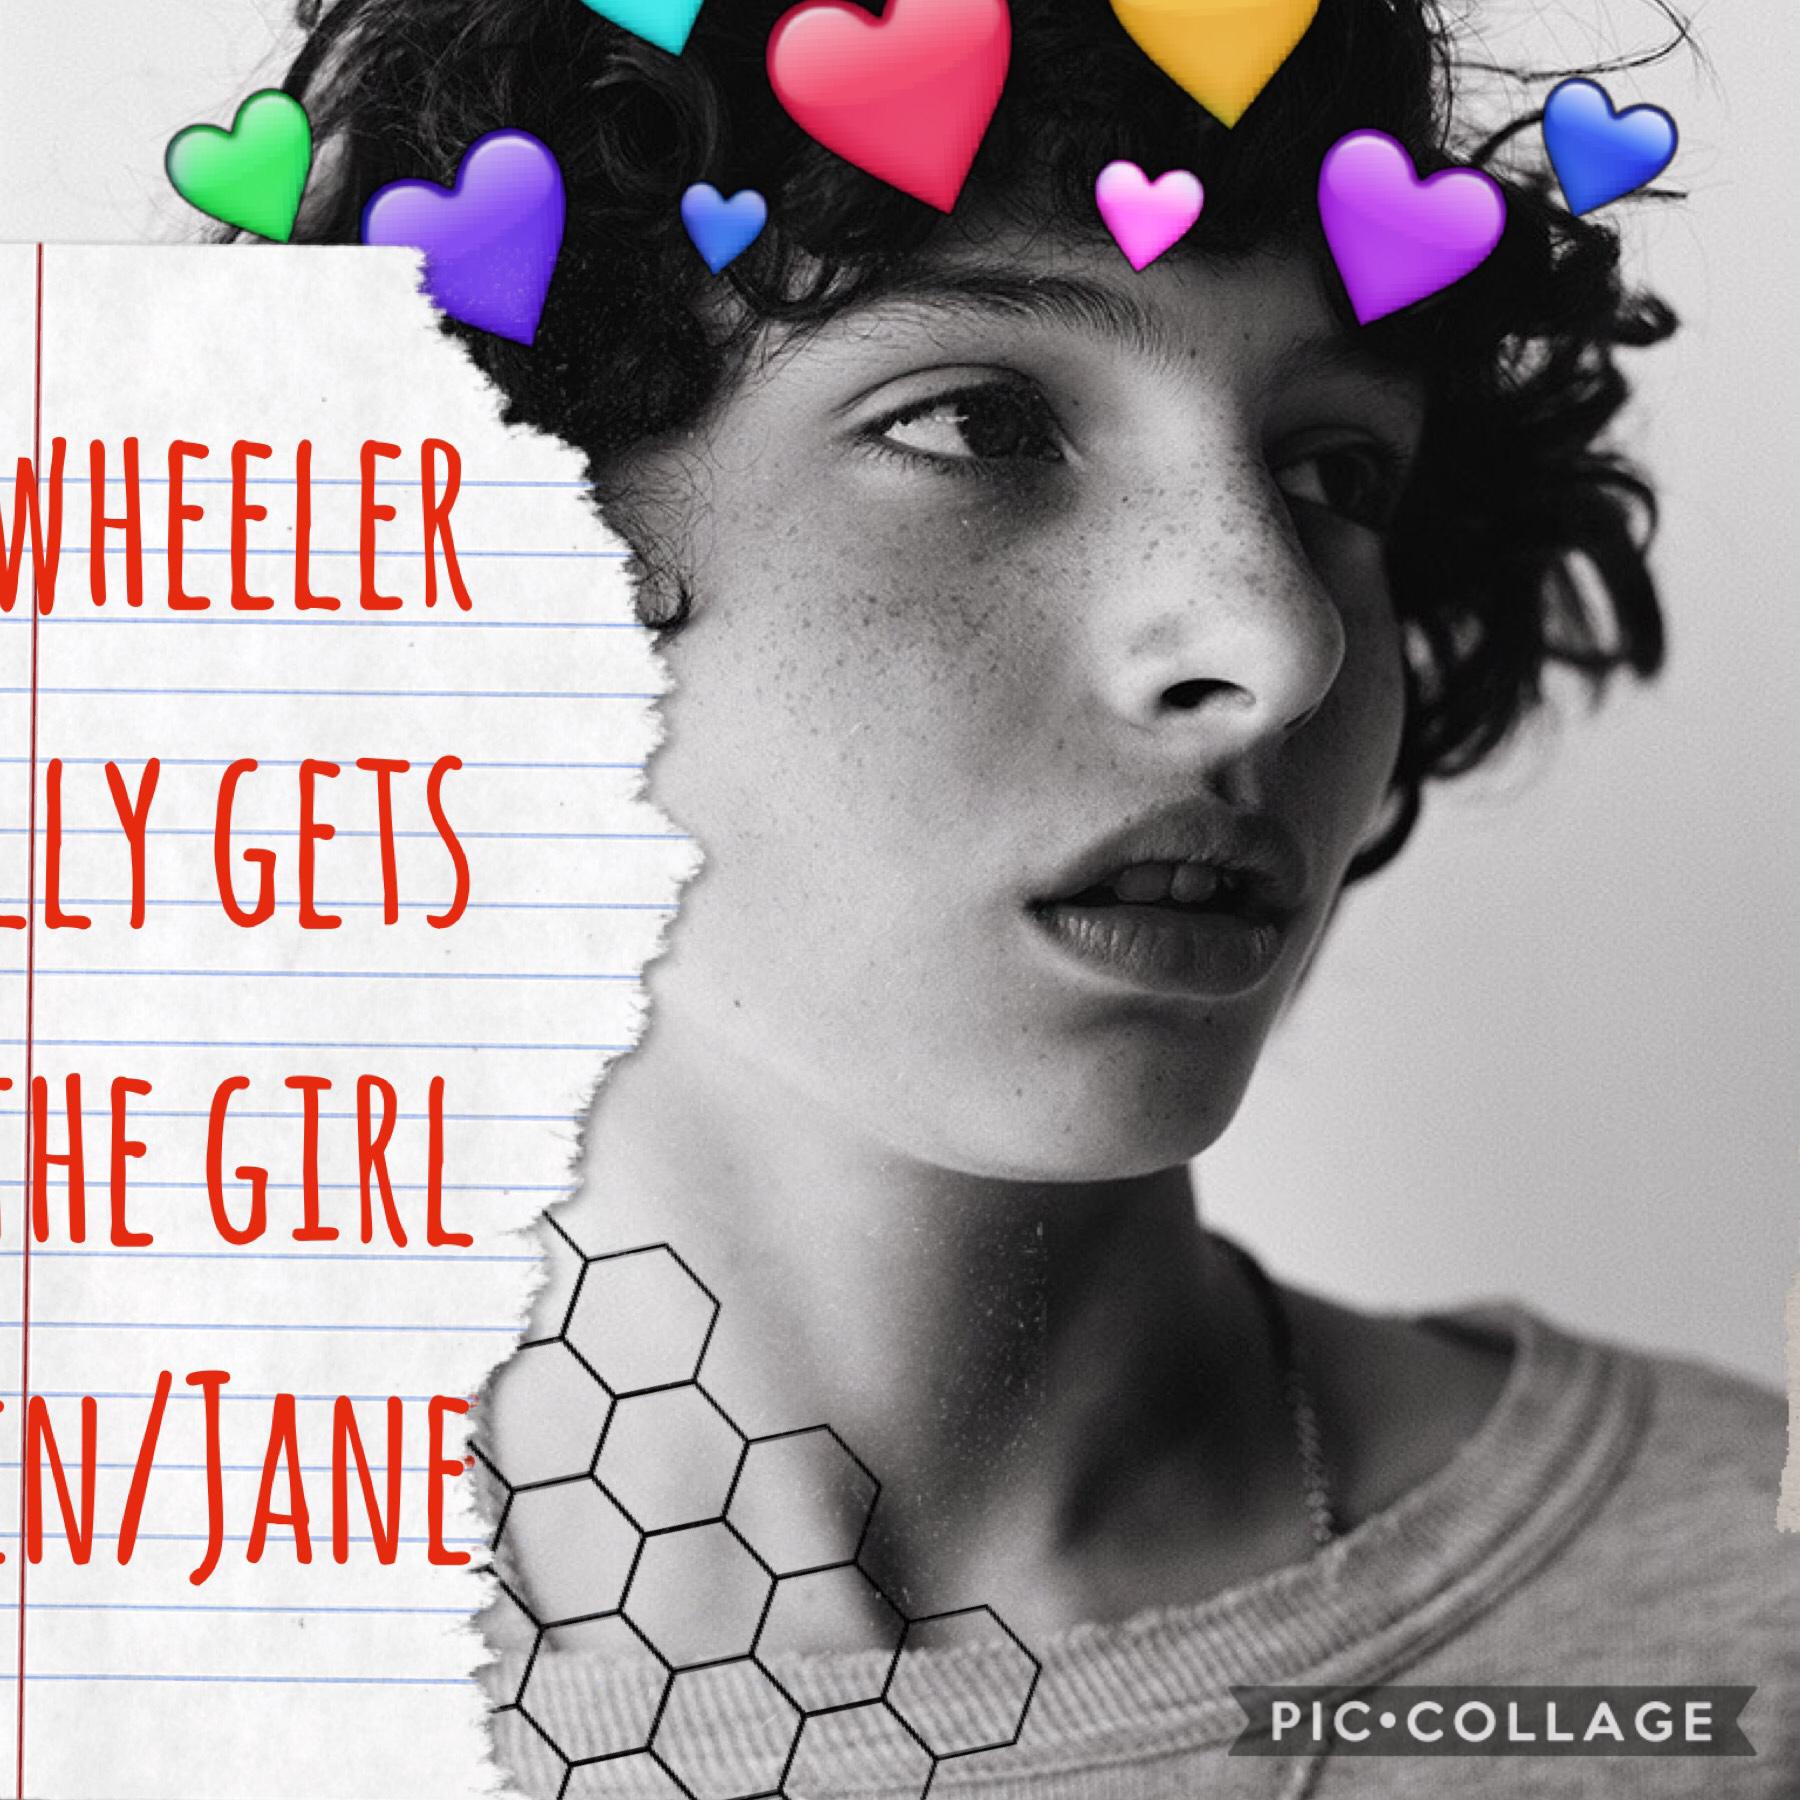 Mike Wheeler gets the girl Eleven/Jane